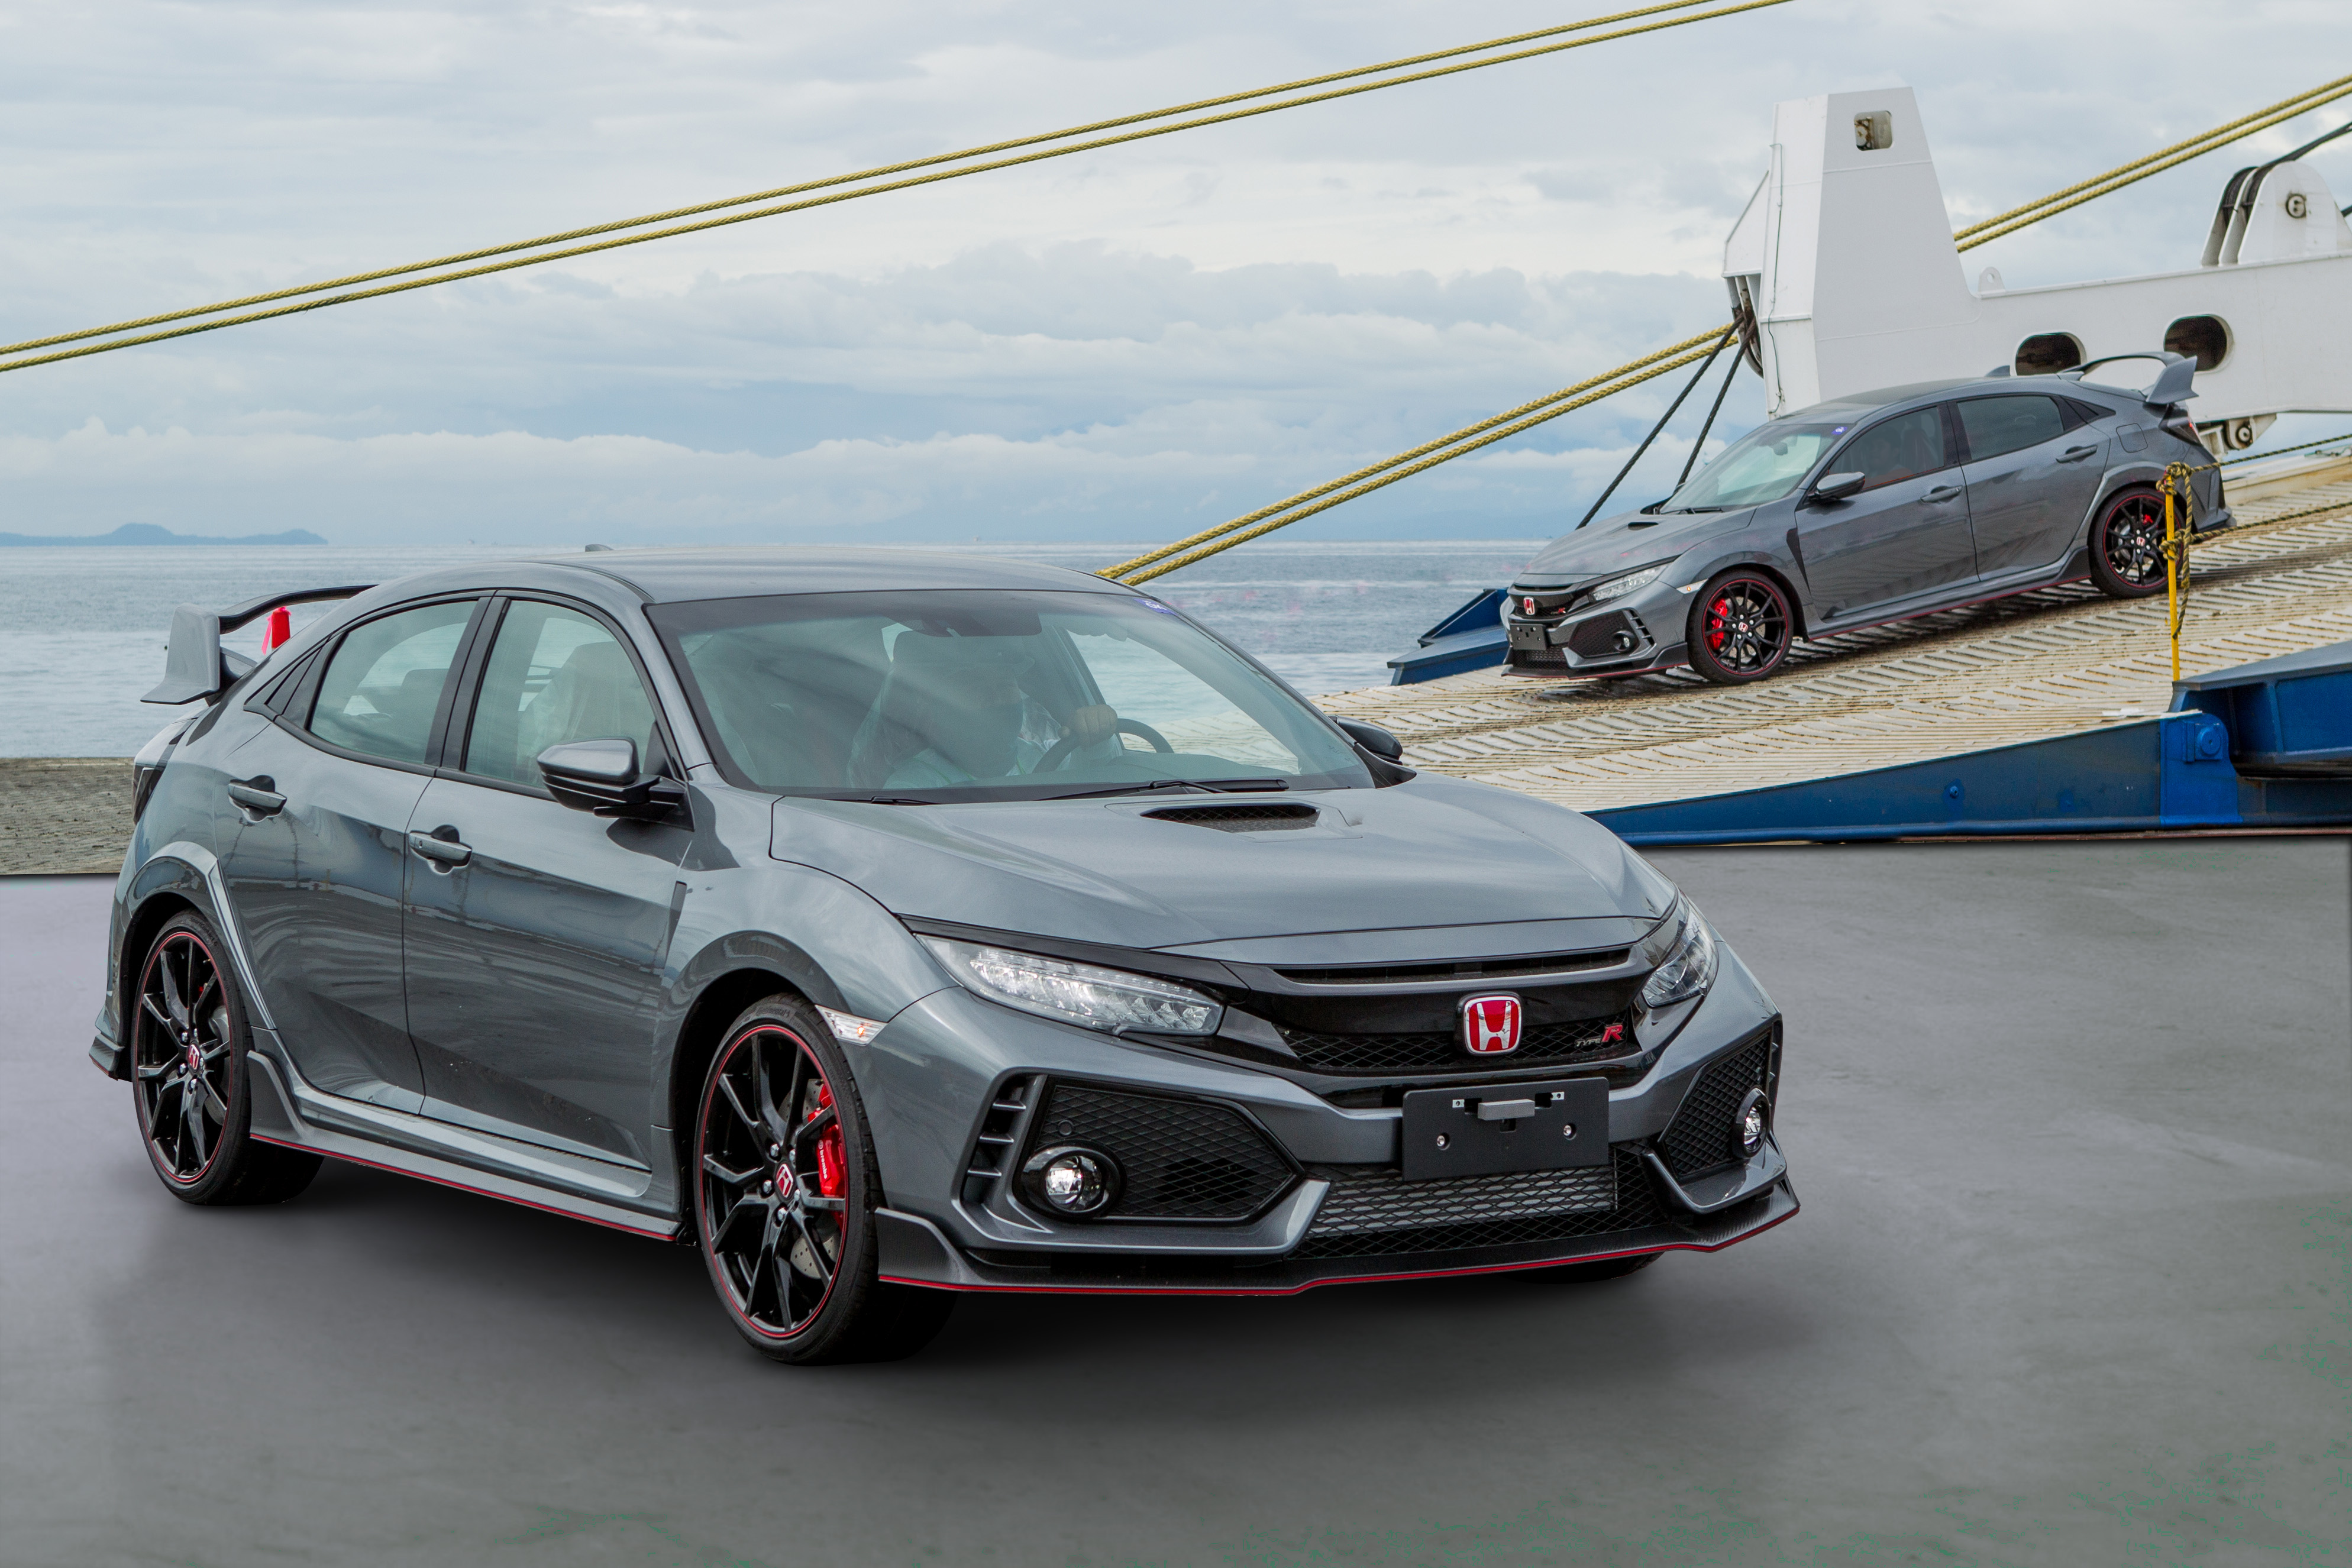 New Polished Metal Metallic Color Honda Civic Type R is Now Available